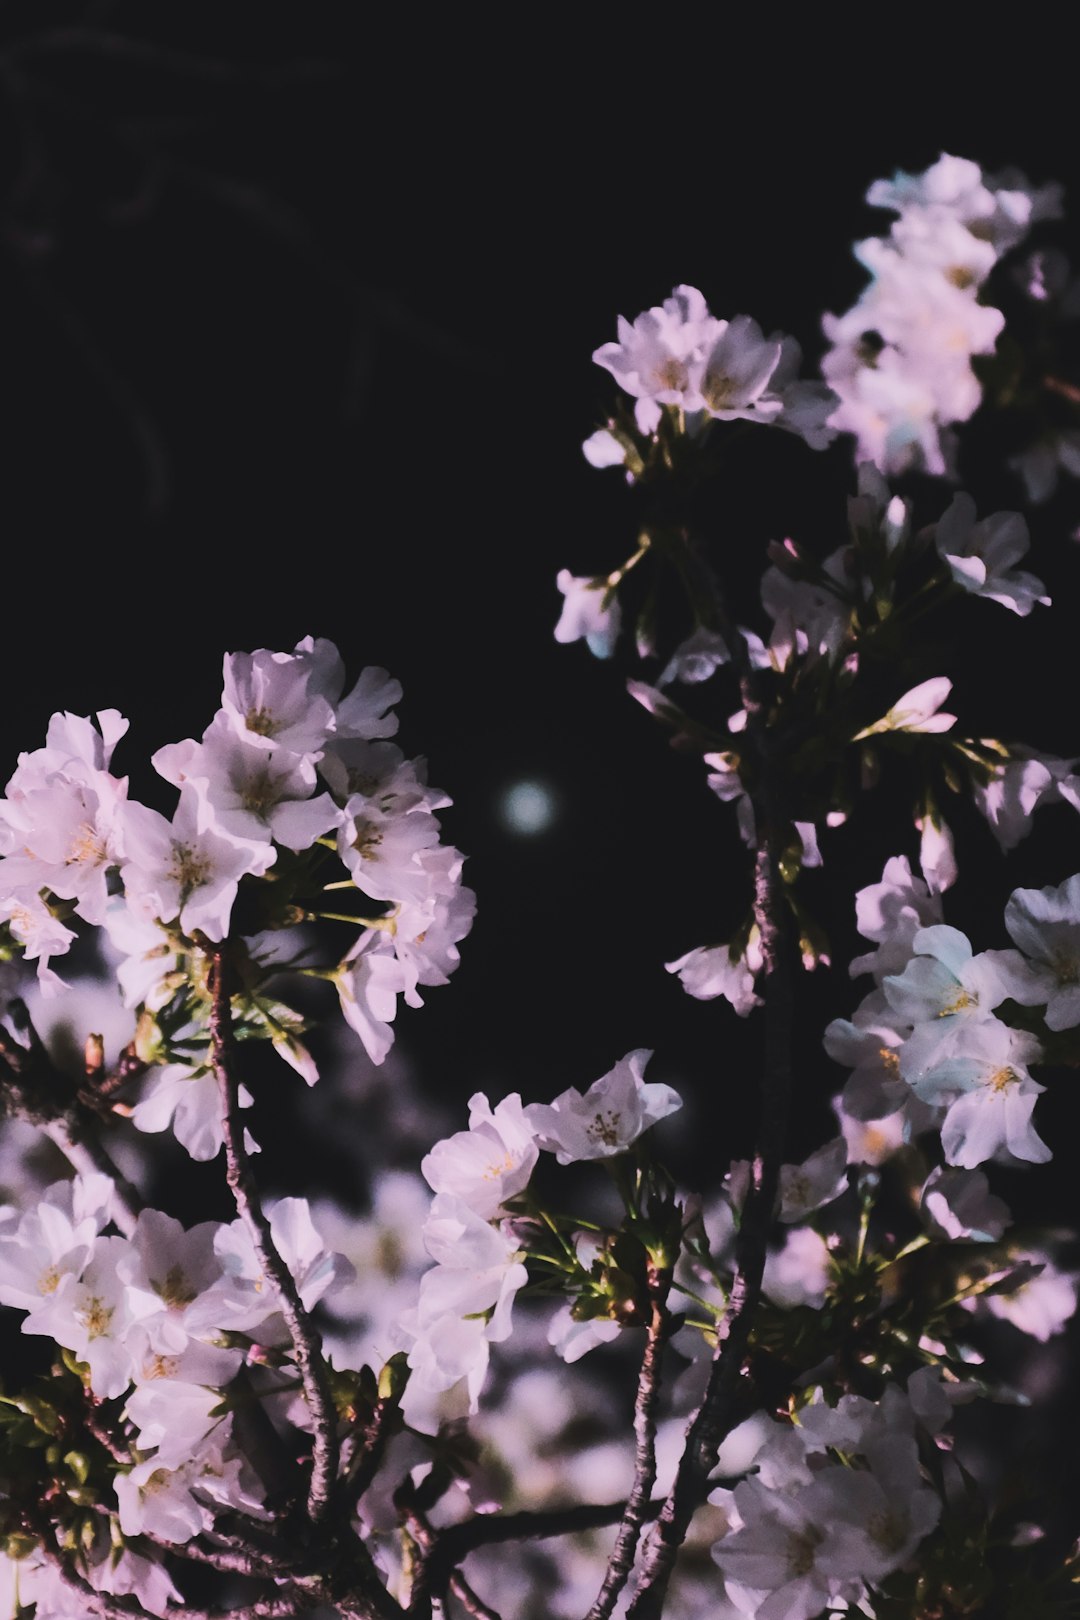 white and purple flowers in black background